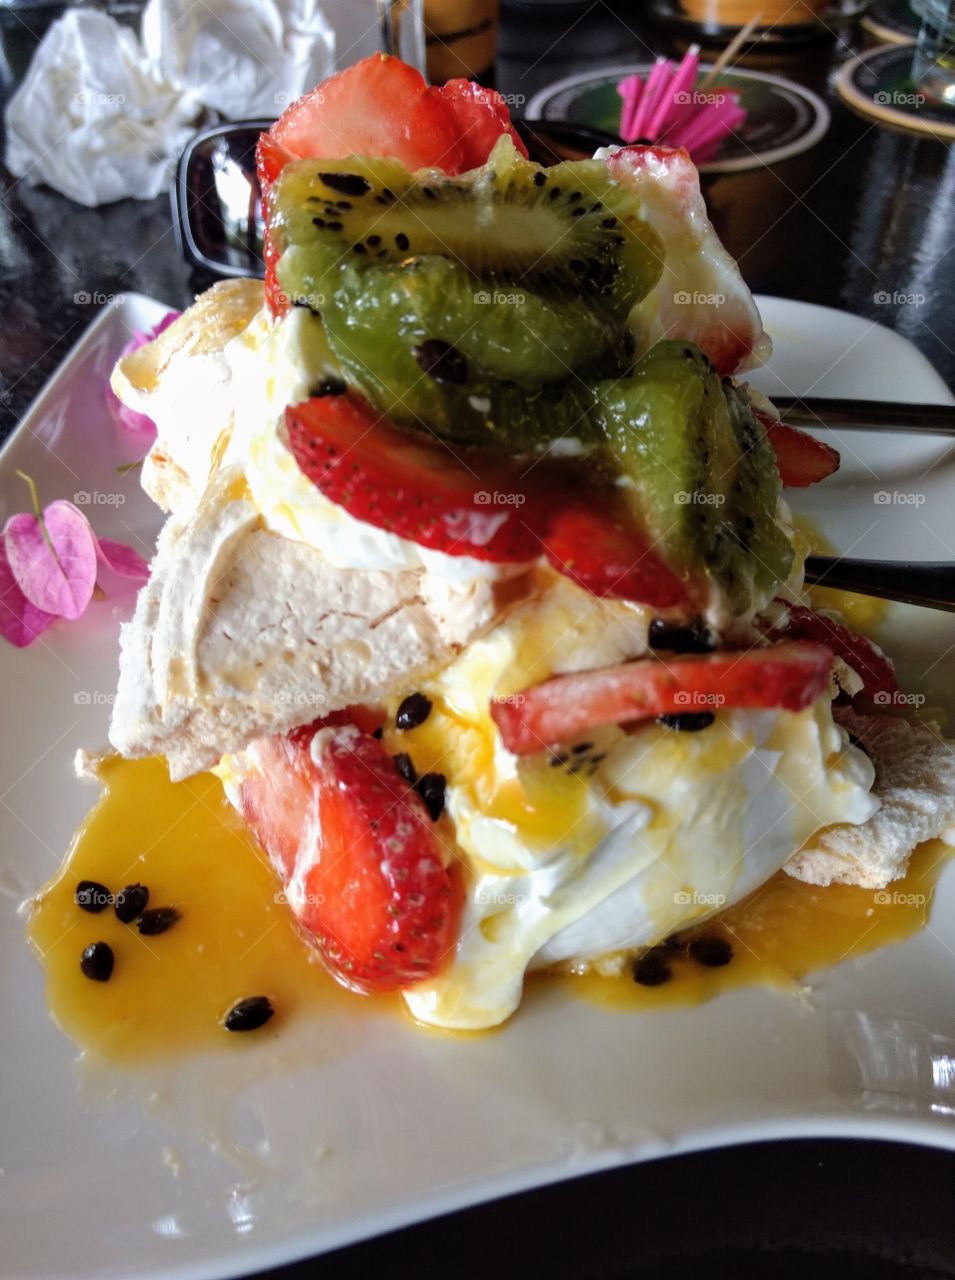 Pavlova with mixed fruits, colorful dessert, tropical, kiwi, strawberry, passion fruit, sweets, airy meringue, plate, delicious, restaurant